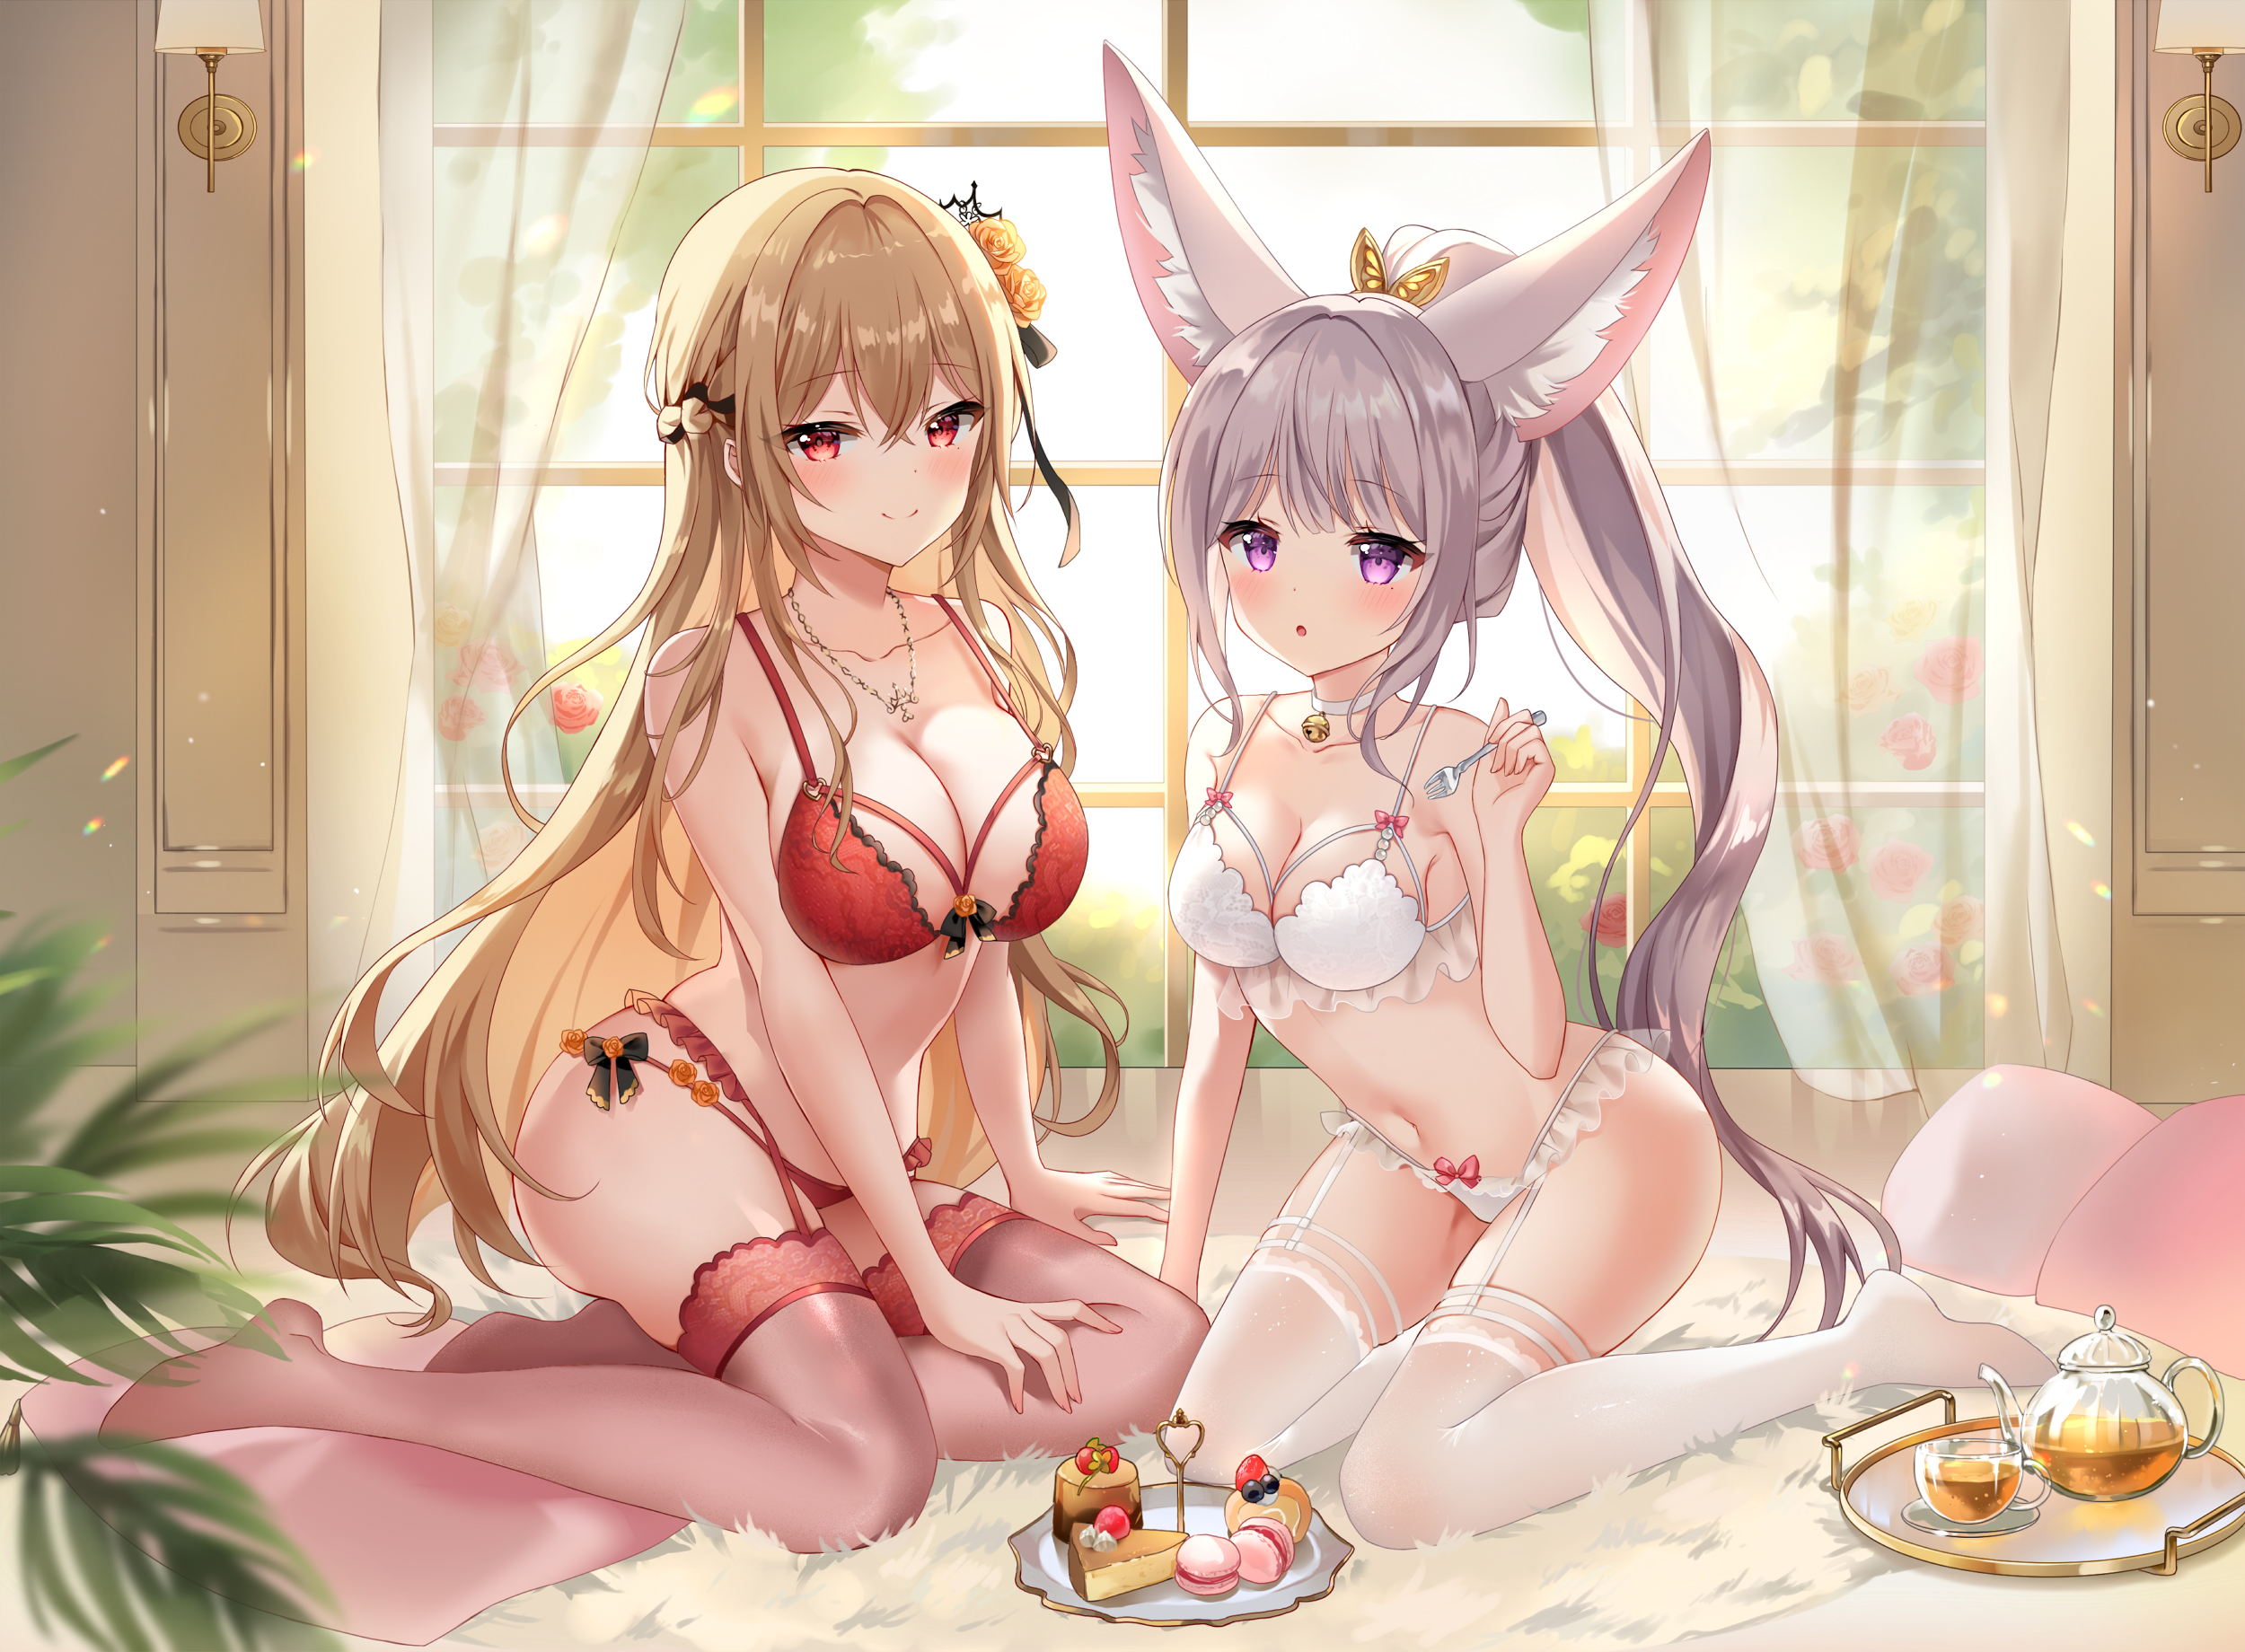 Anime 2500x1840 anime anime girls lingerie stockings cleavage big boobs window curtains looking at viewer fork long hair blushing necklace sweets macarons cake animal ears flowers leaves smiling